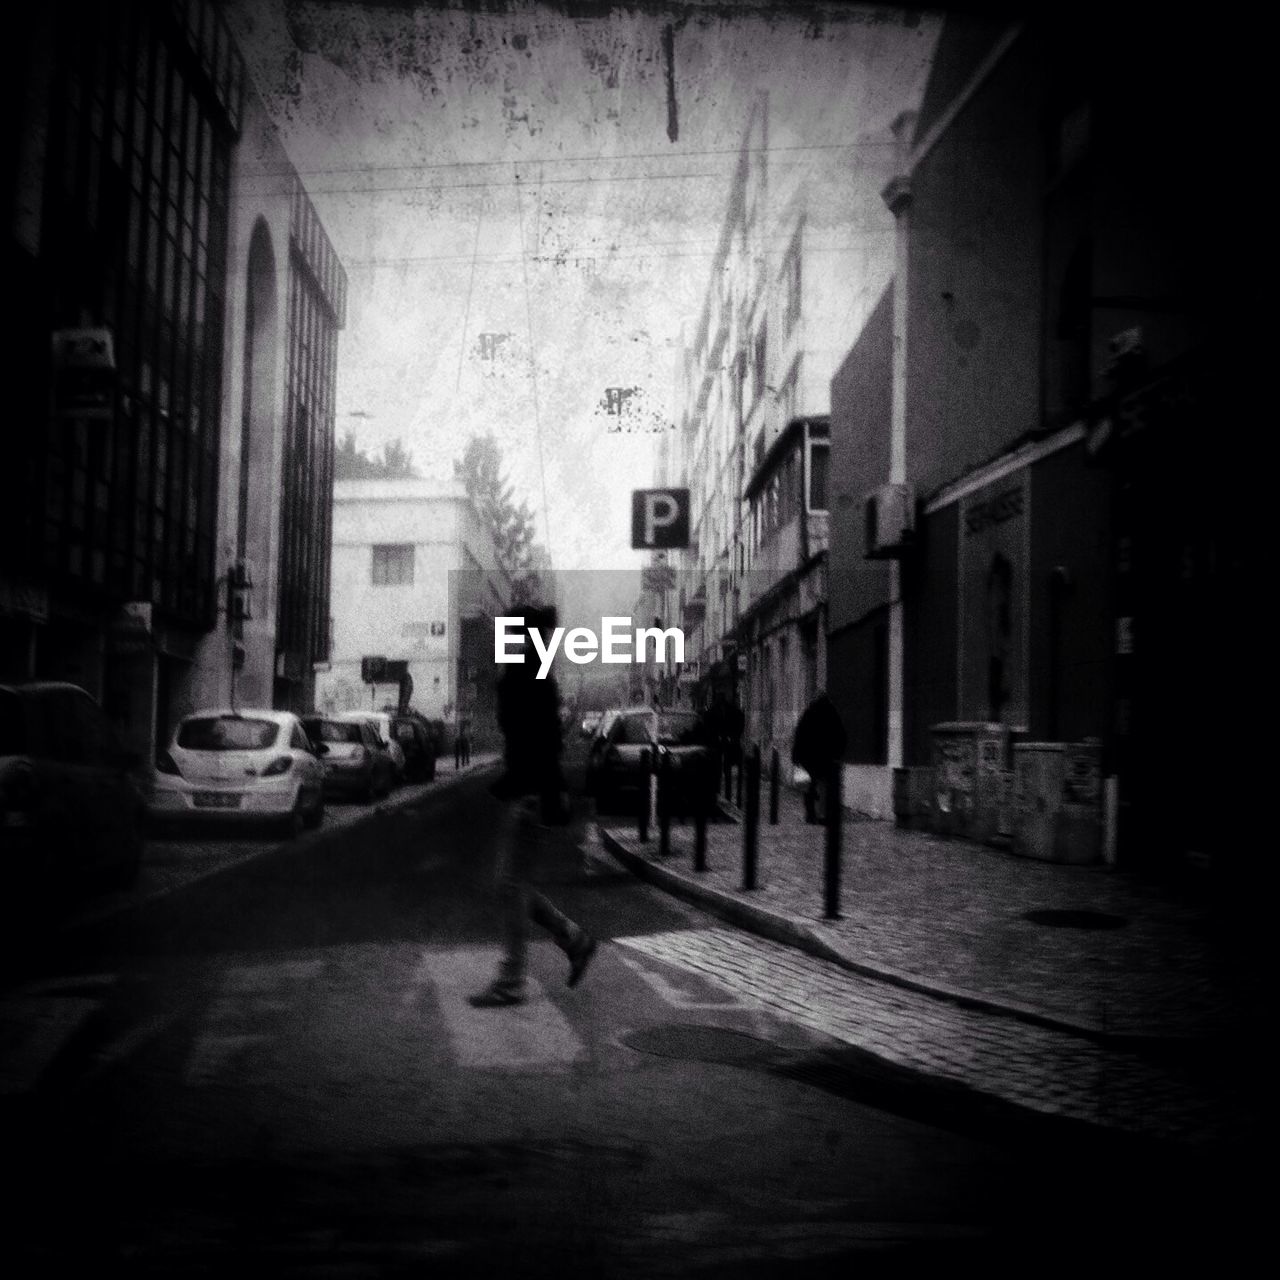 Blurred motion of man walking on street amidst buildings in city